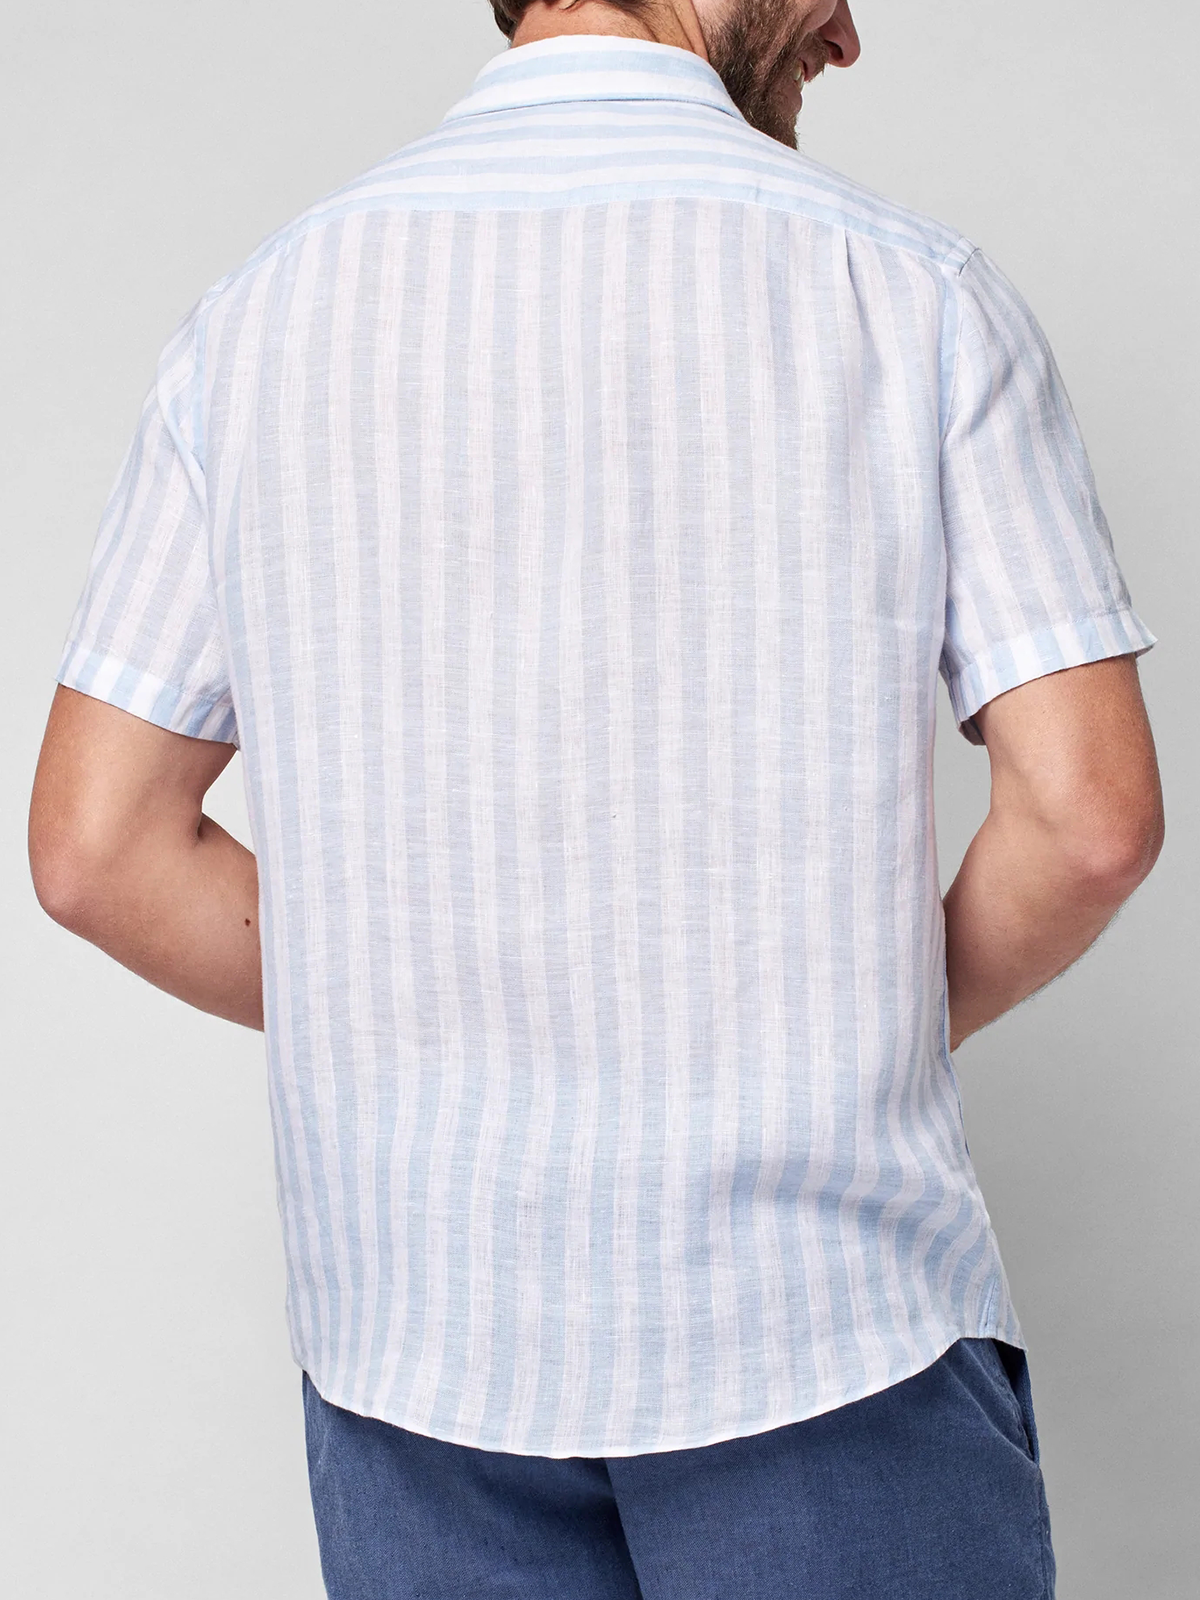 Cotton and linen American casual style stripes linen Shirt with short sleeves